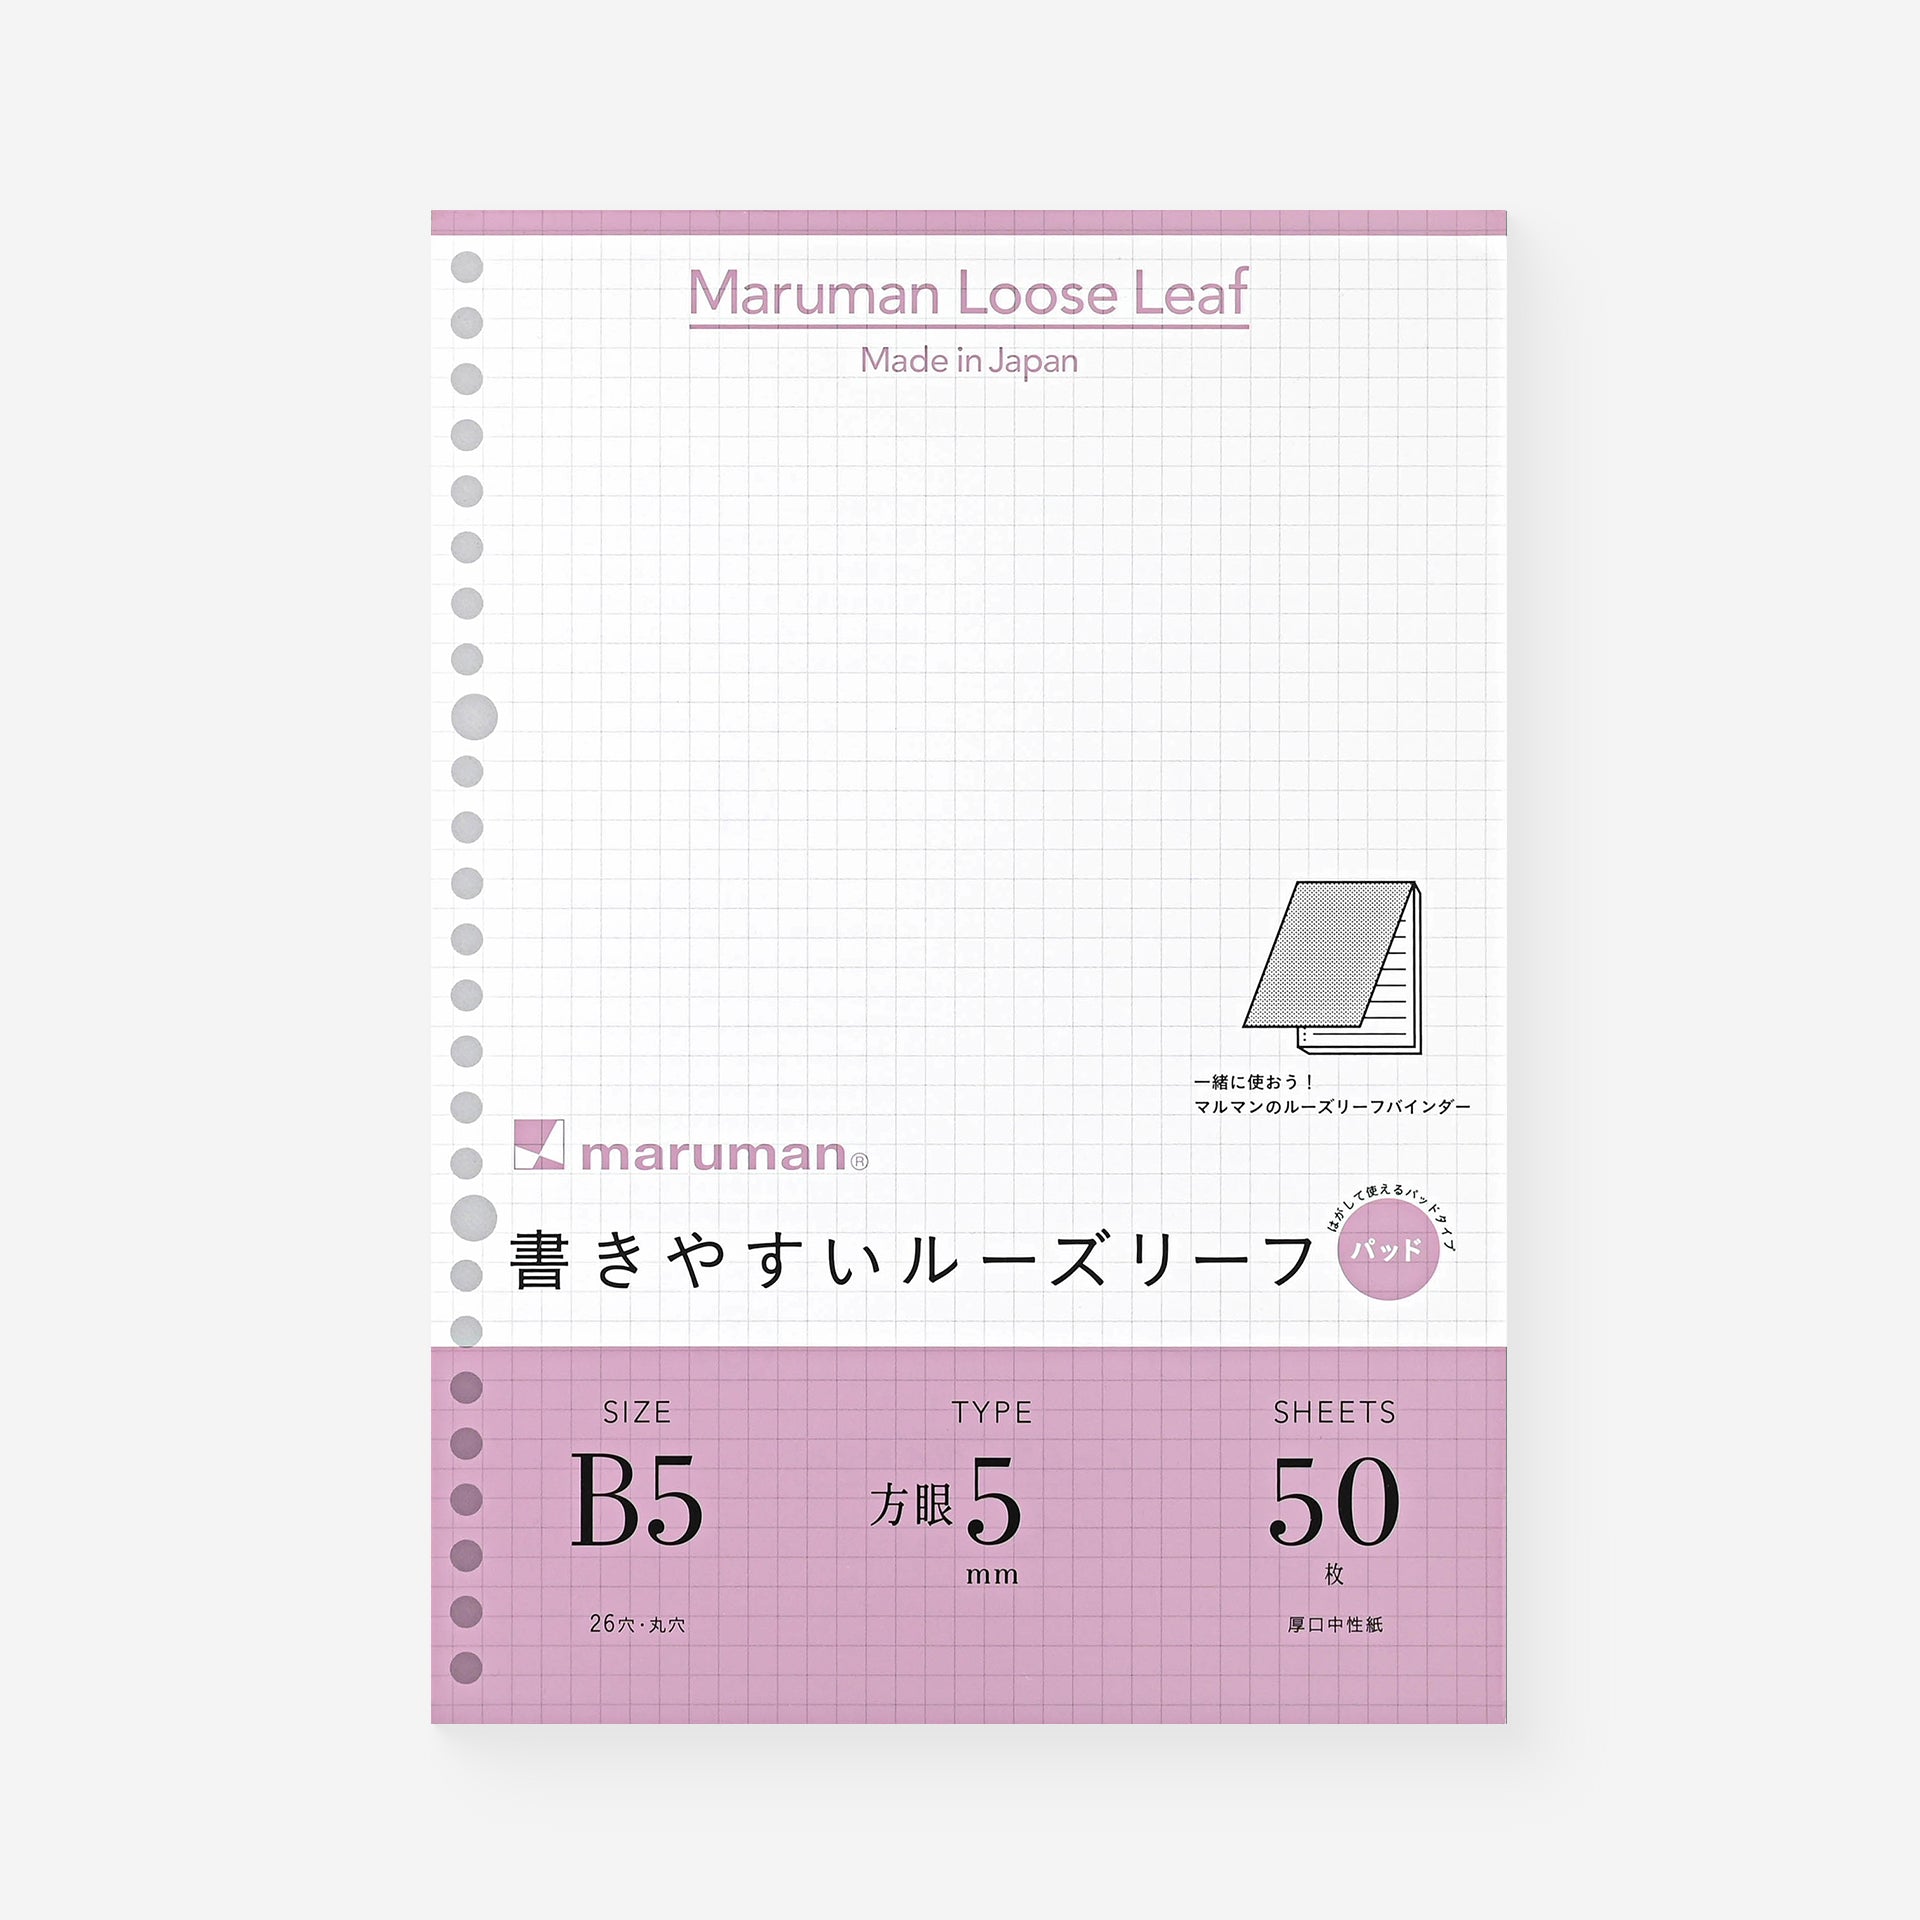 Maruman Loose Leaf "Easy To Write" Notepad B5 | Ruled or Graph Graph